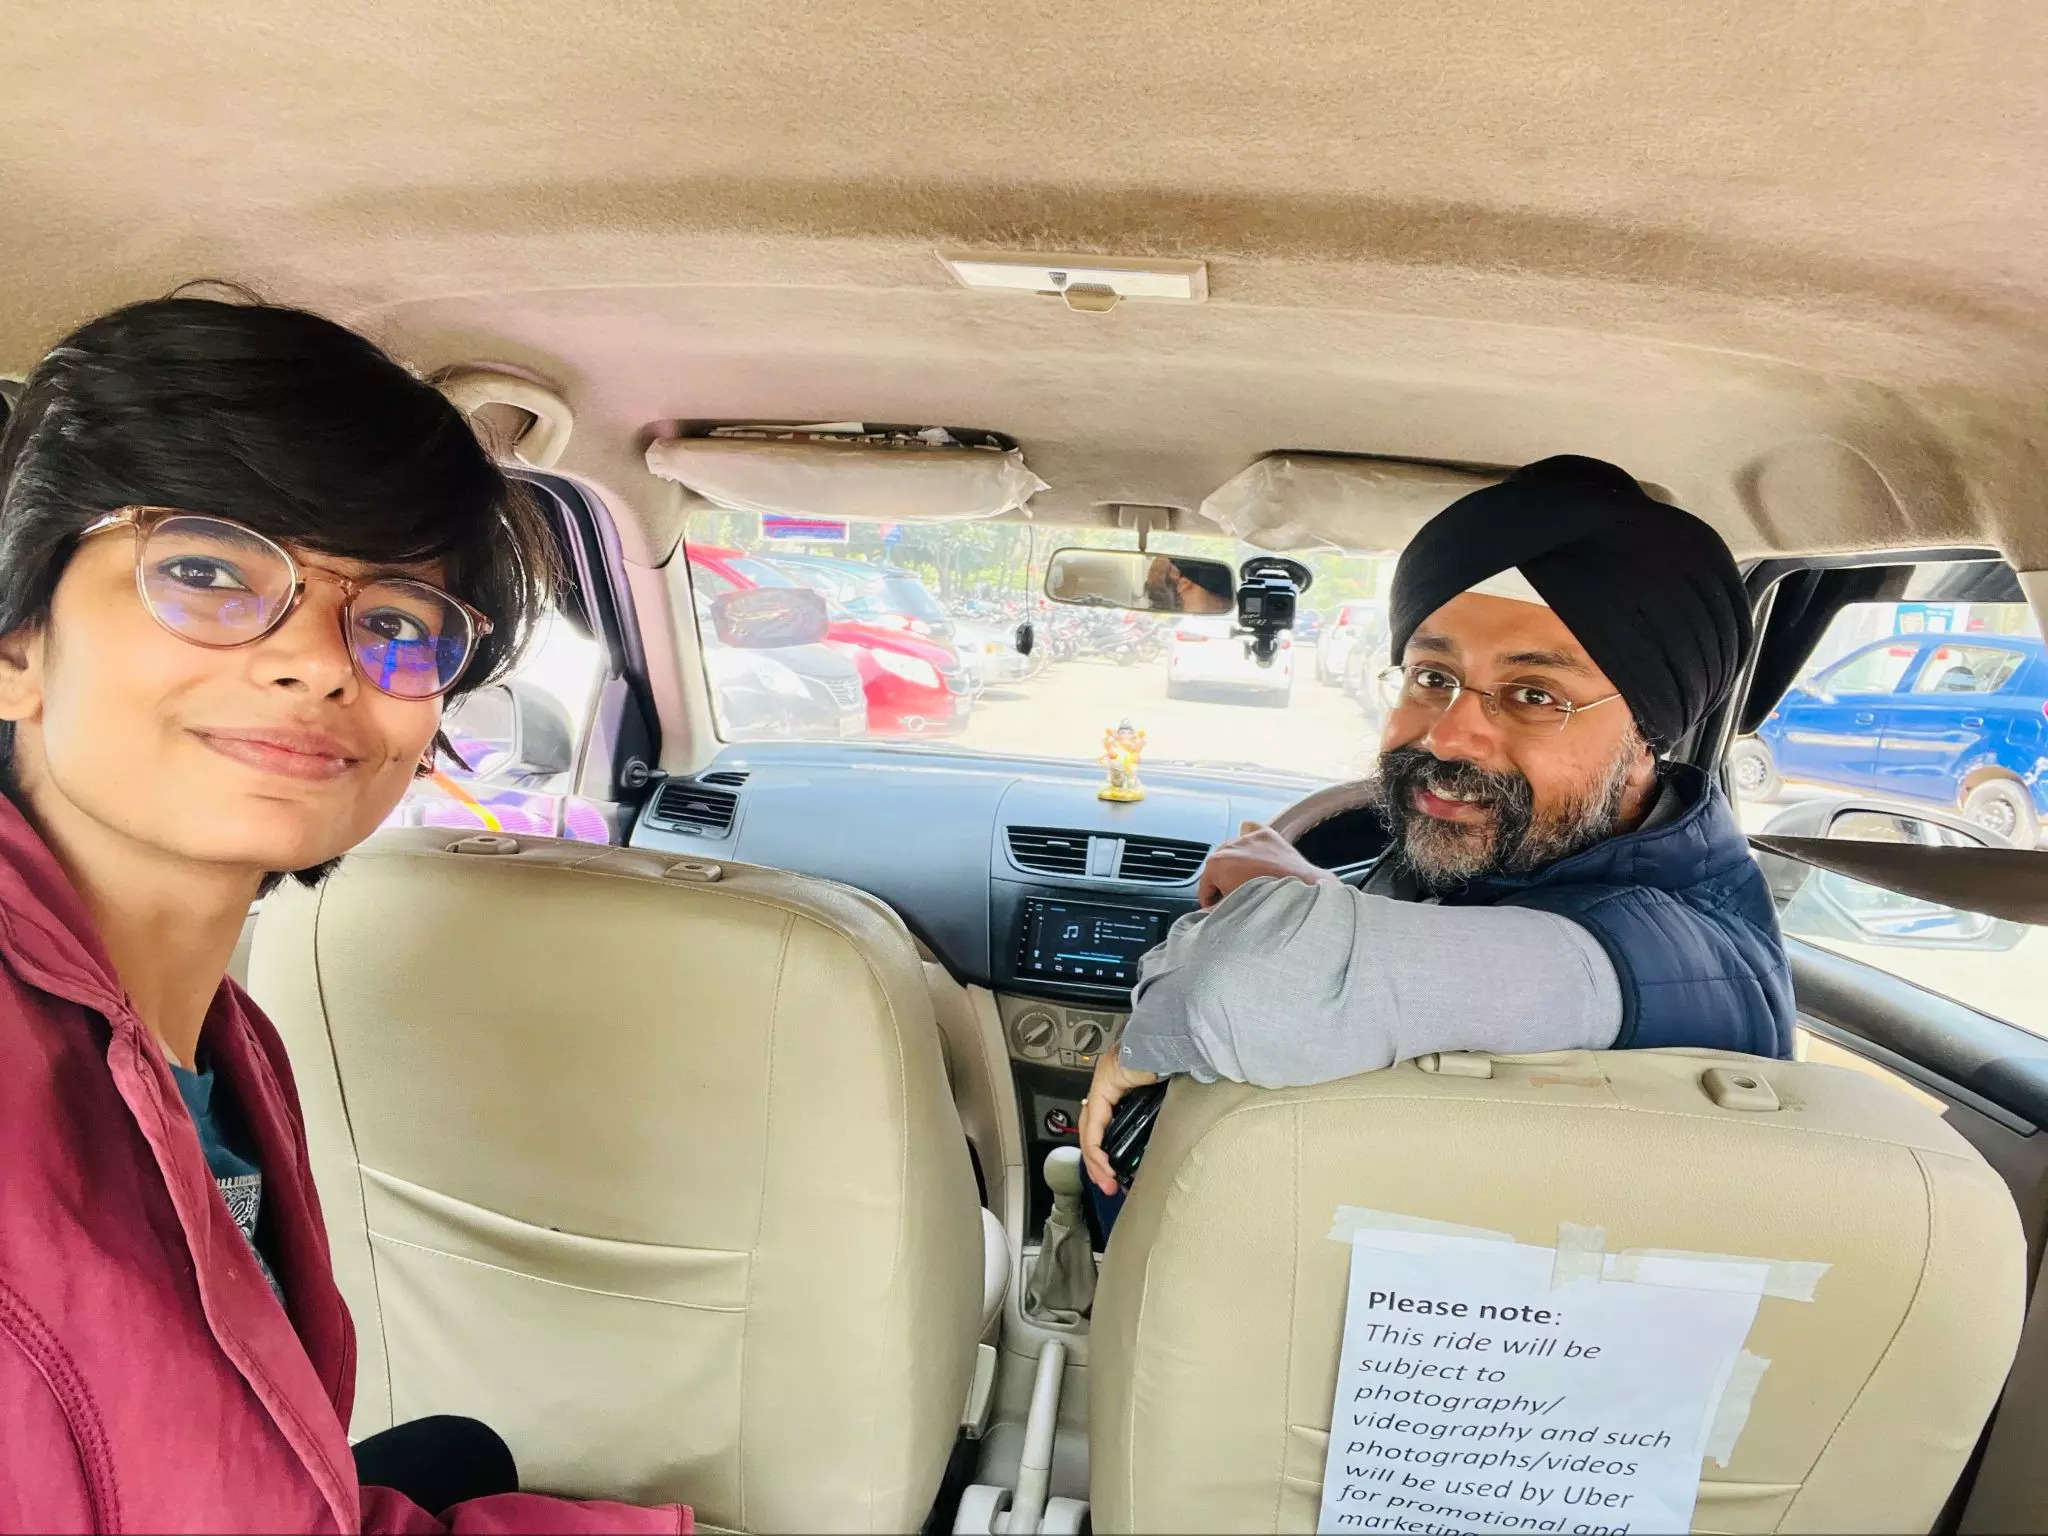 Ananya Dwivedi (left) pictured with Prabhjeet Singh (right) | Image: LinkedIn